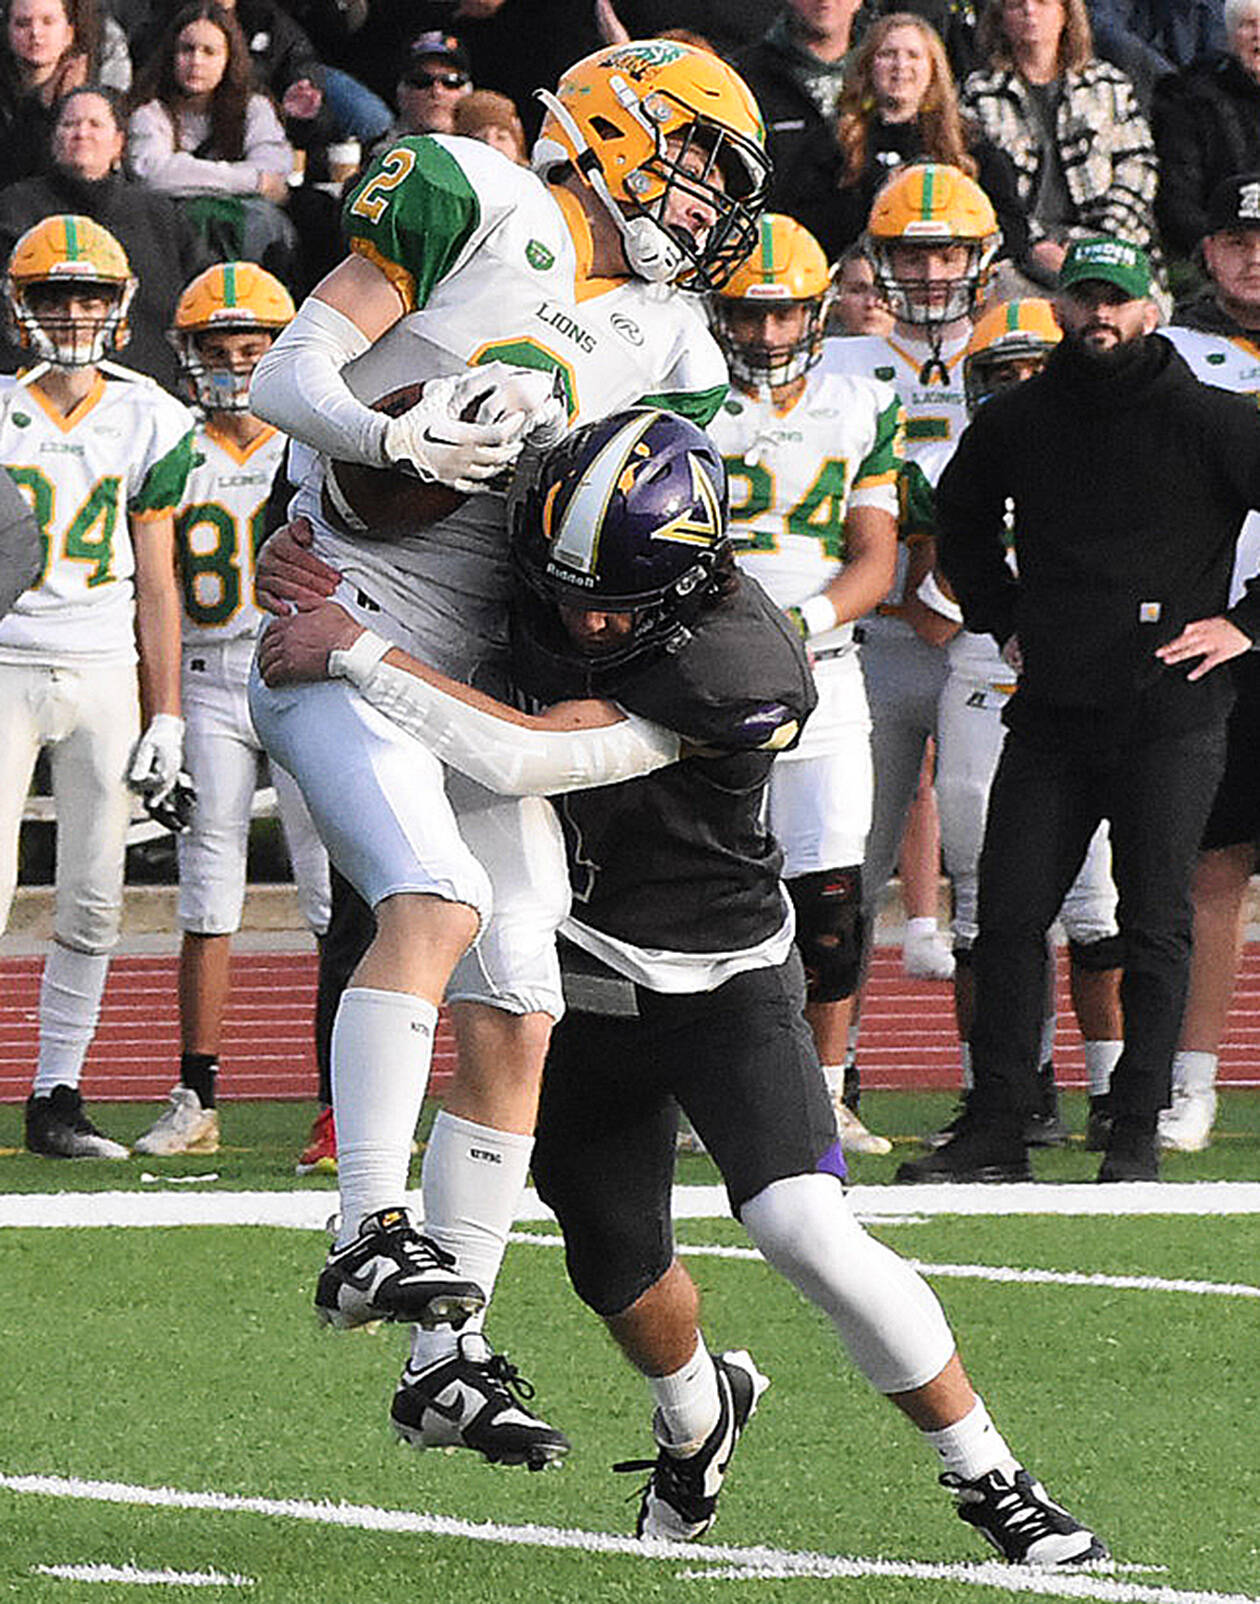 Nicholas Zeller-Singh/Kitsap News Group Photos
Viking Alex Hitchings gave up a catch on this play but later made the game-winning interception against Lynden.